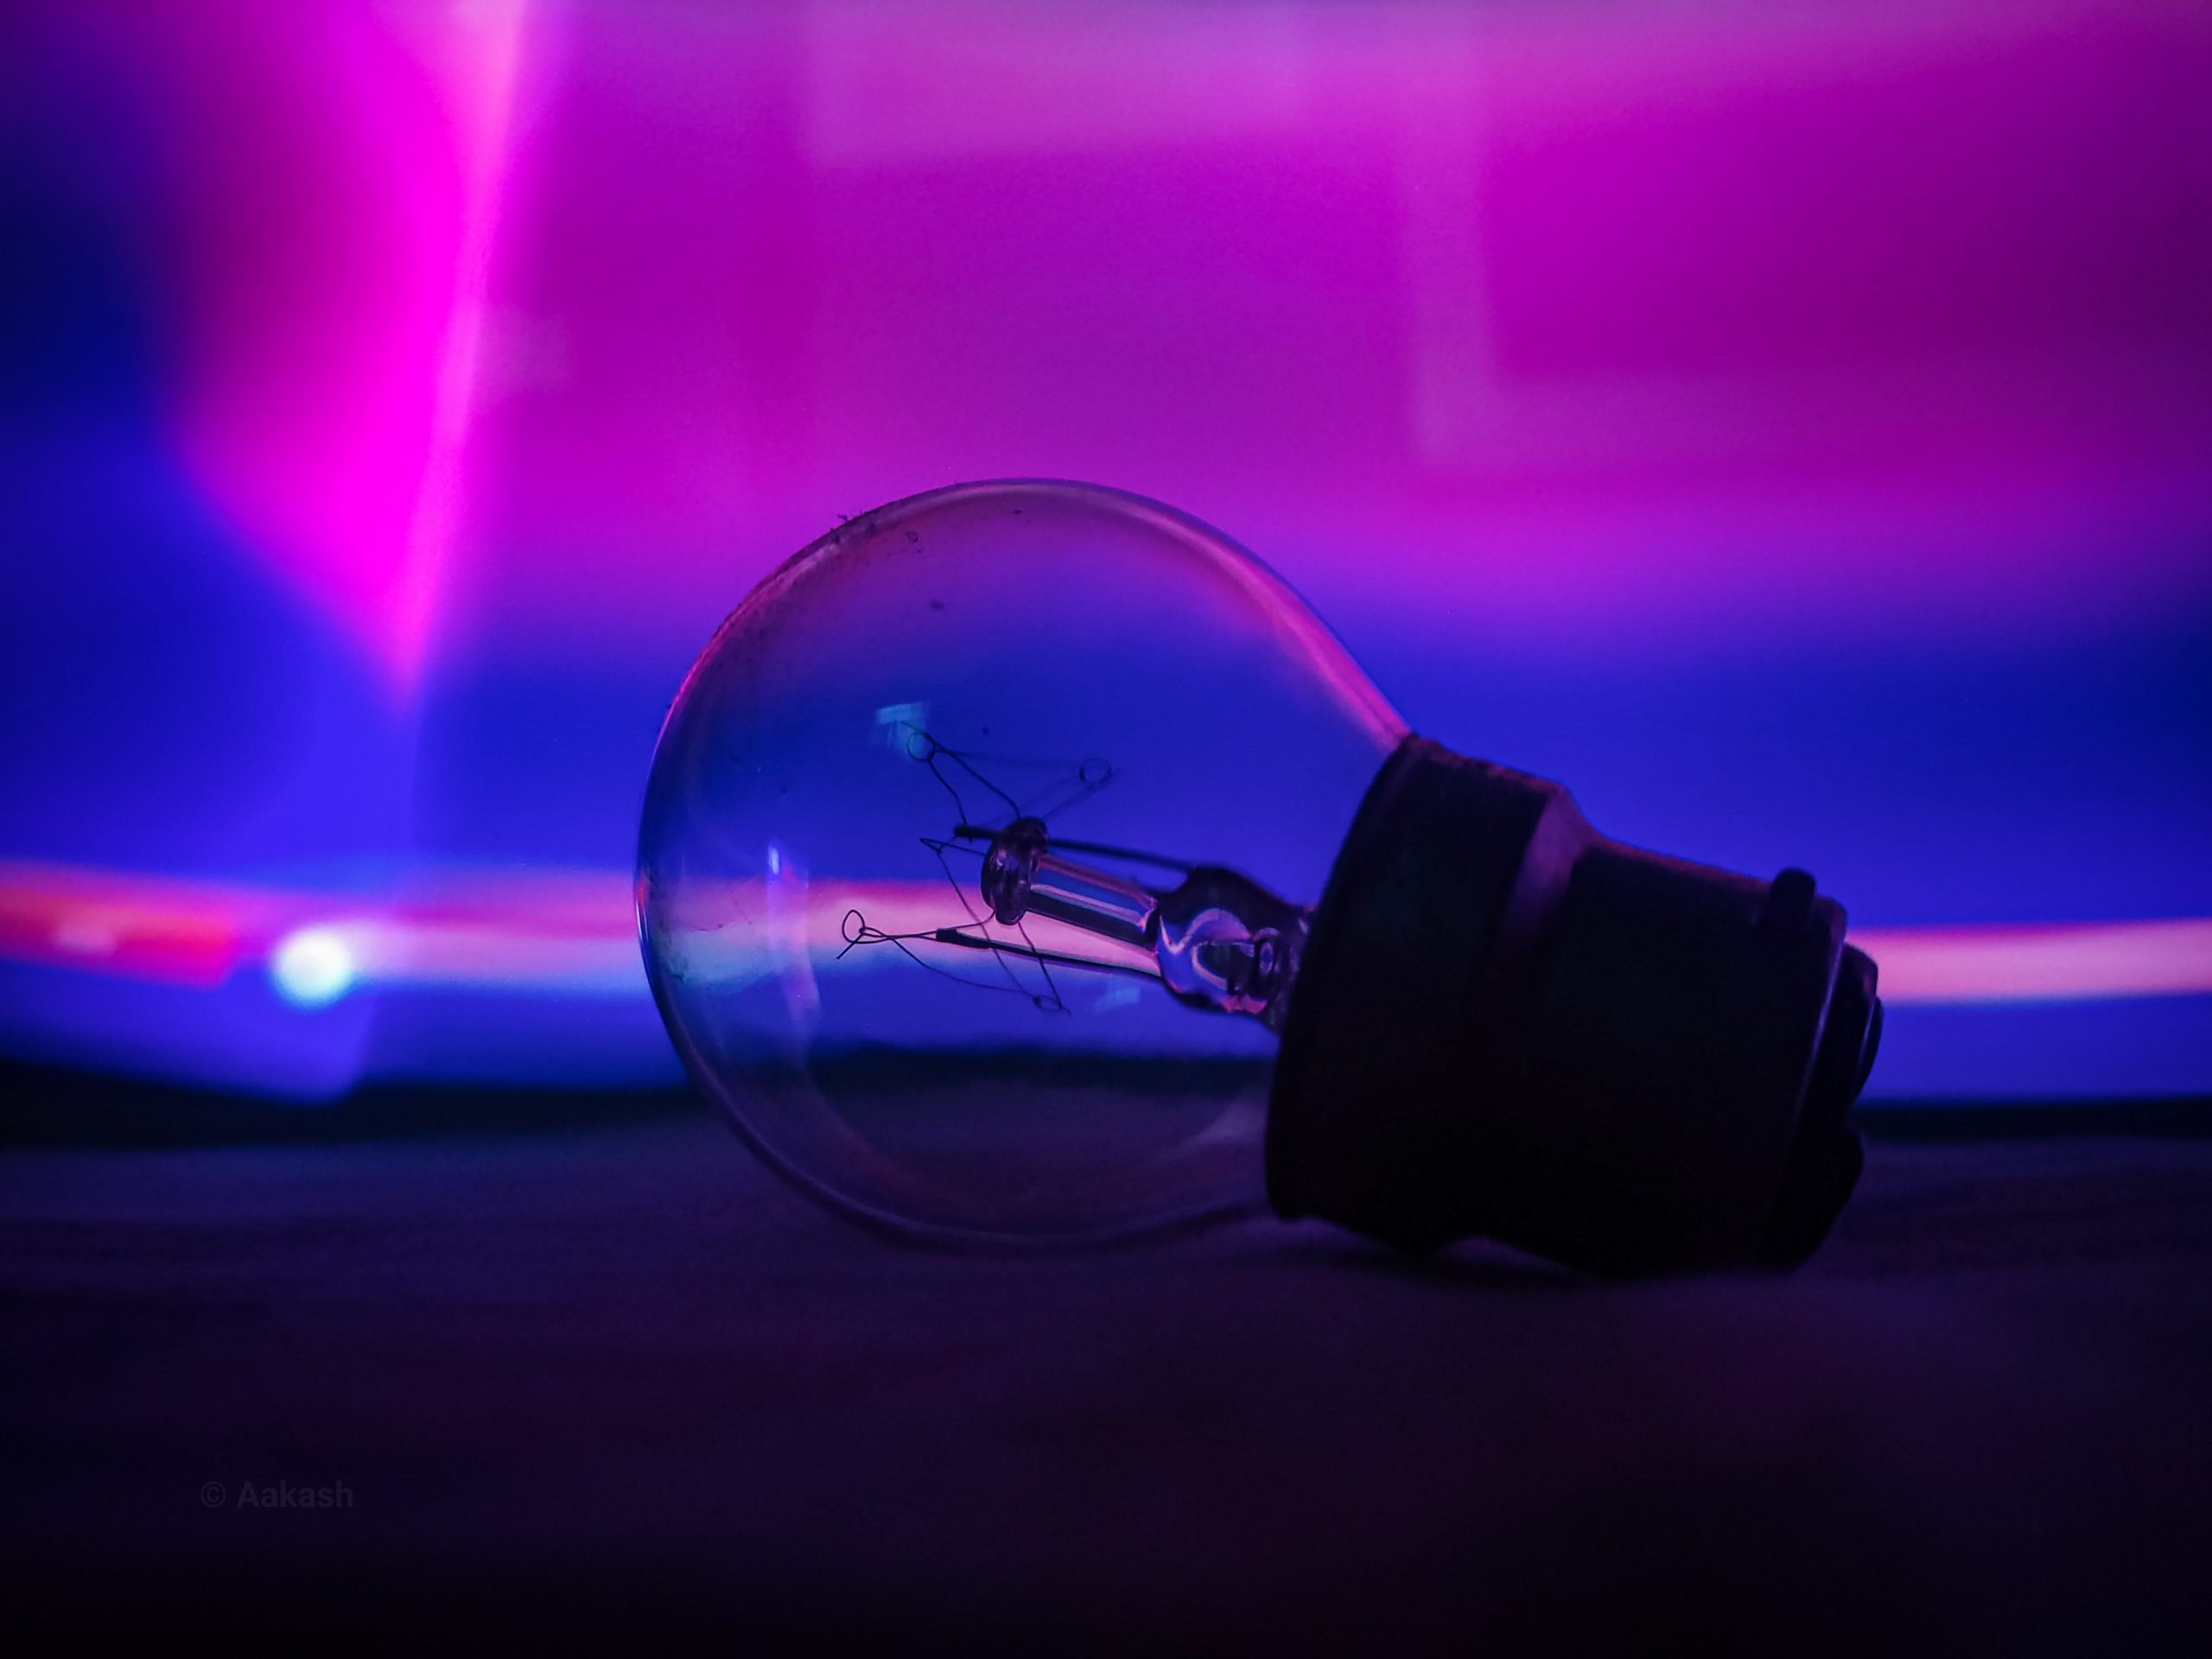 Bulb in colourful background